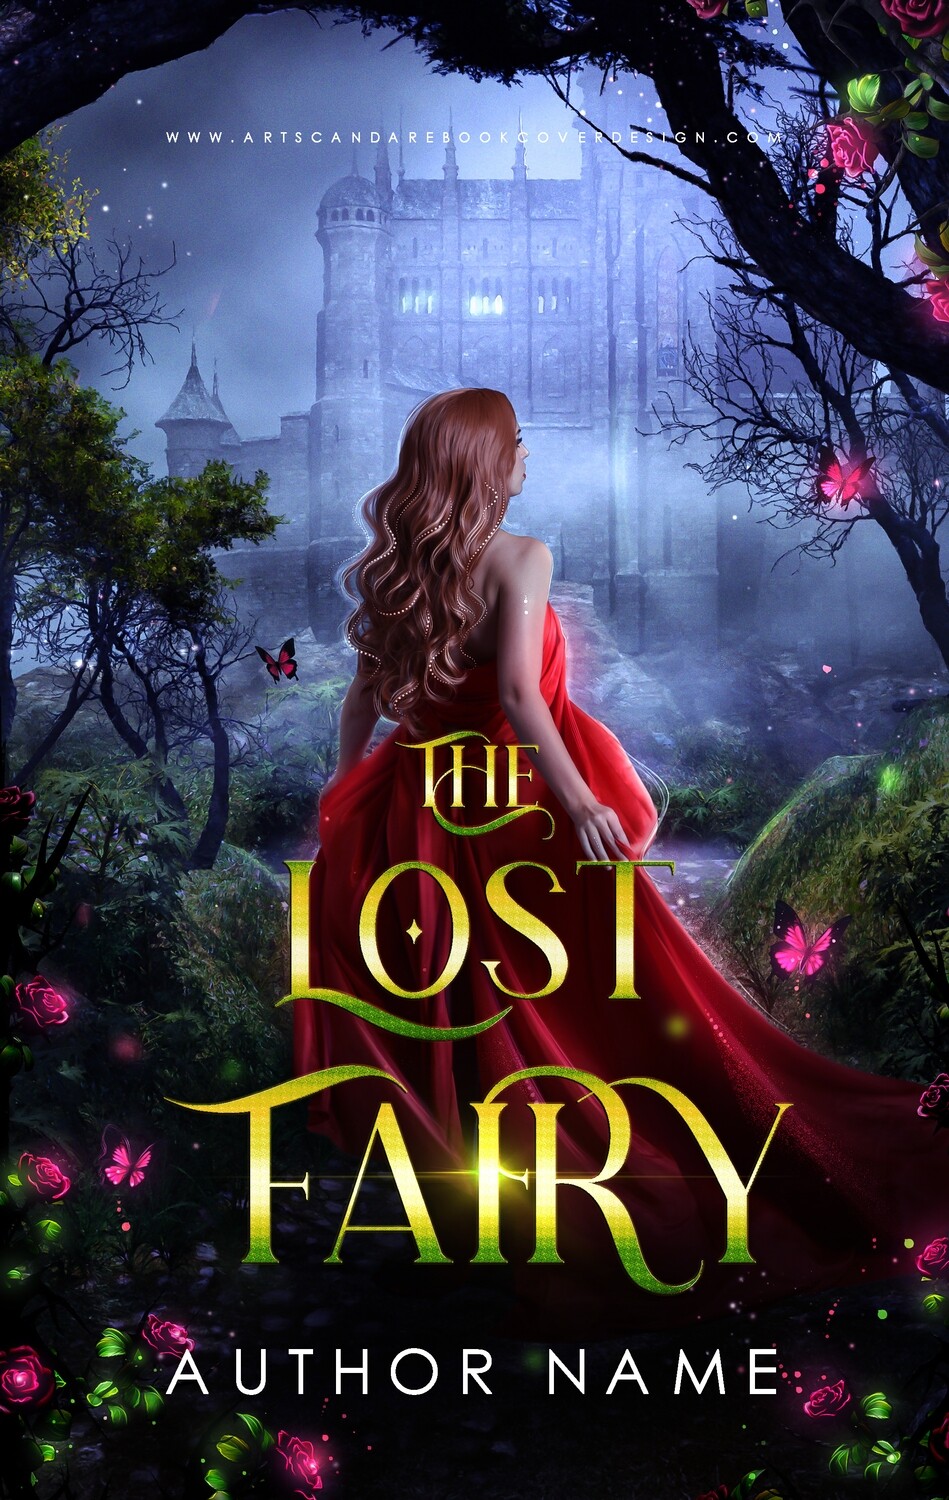 Ebook: The Lost Fairy